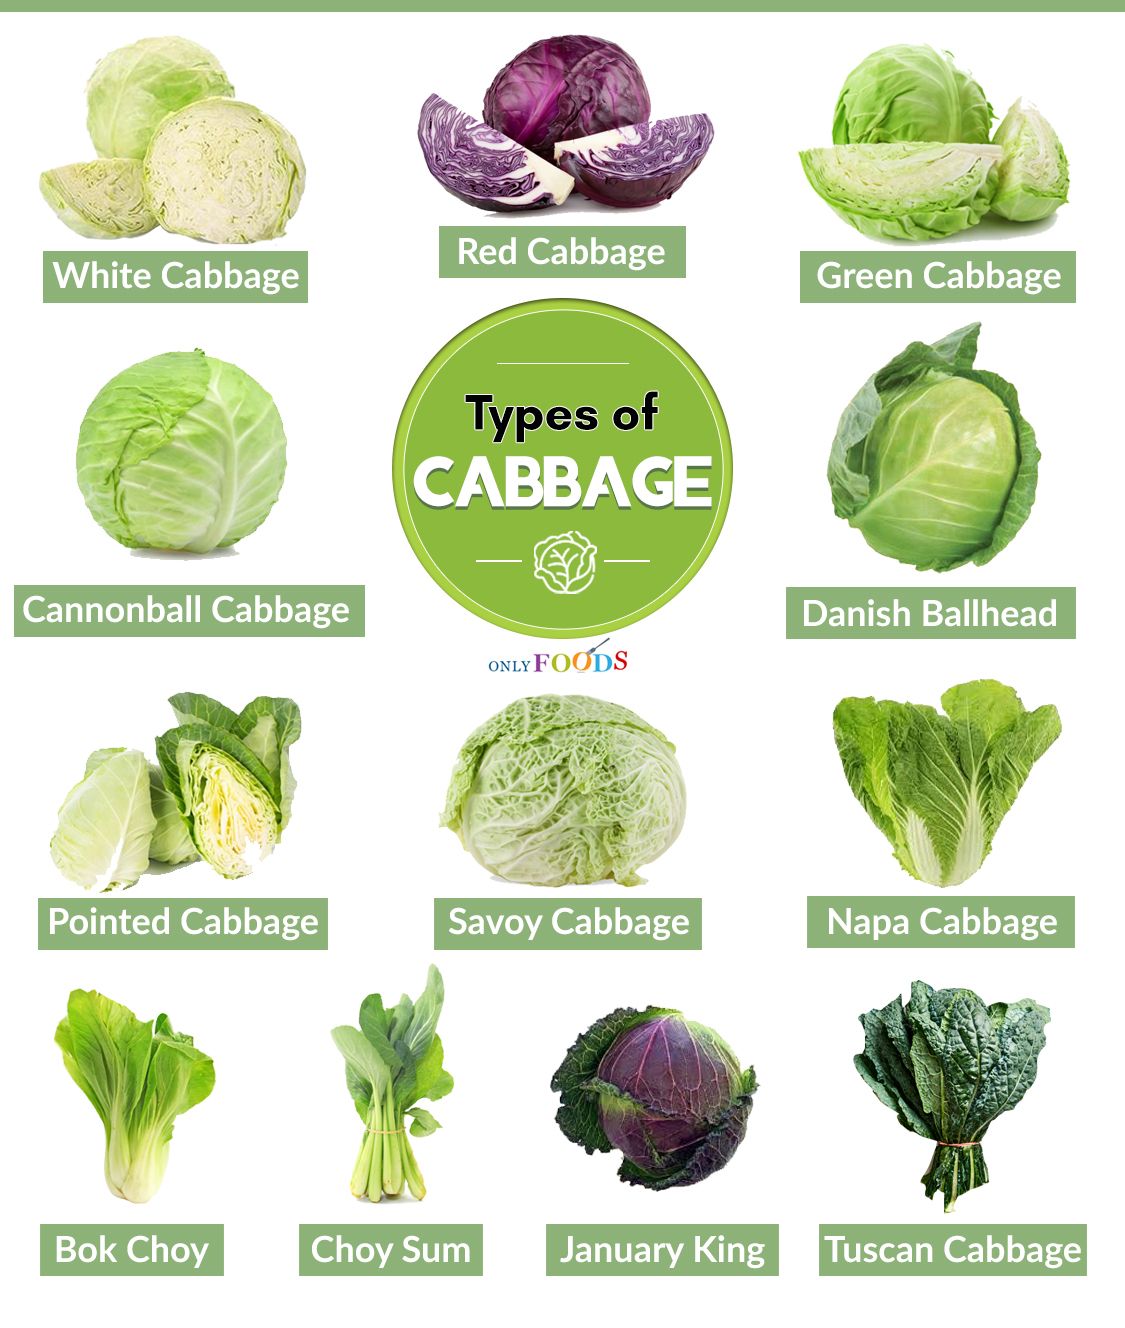 What kind of cabbage is green with green leaves?